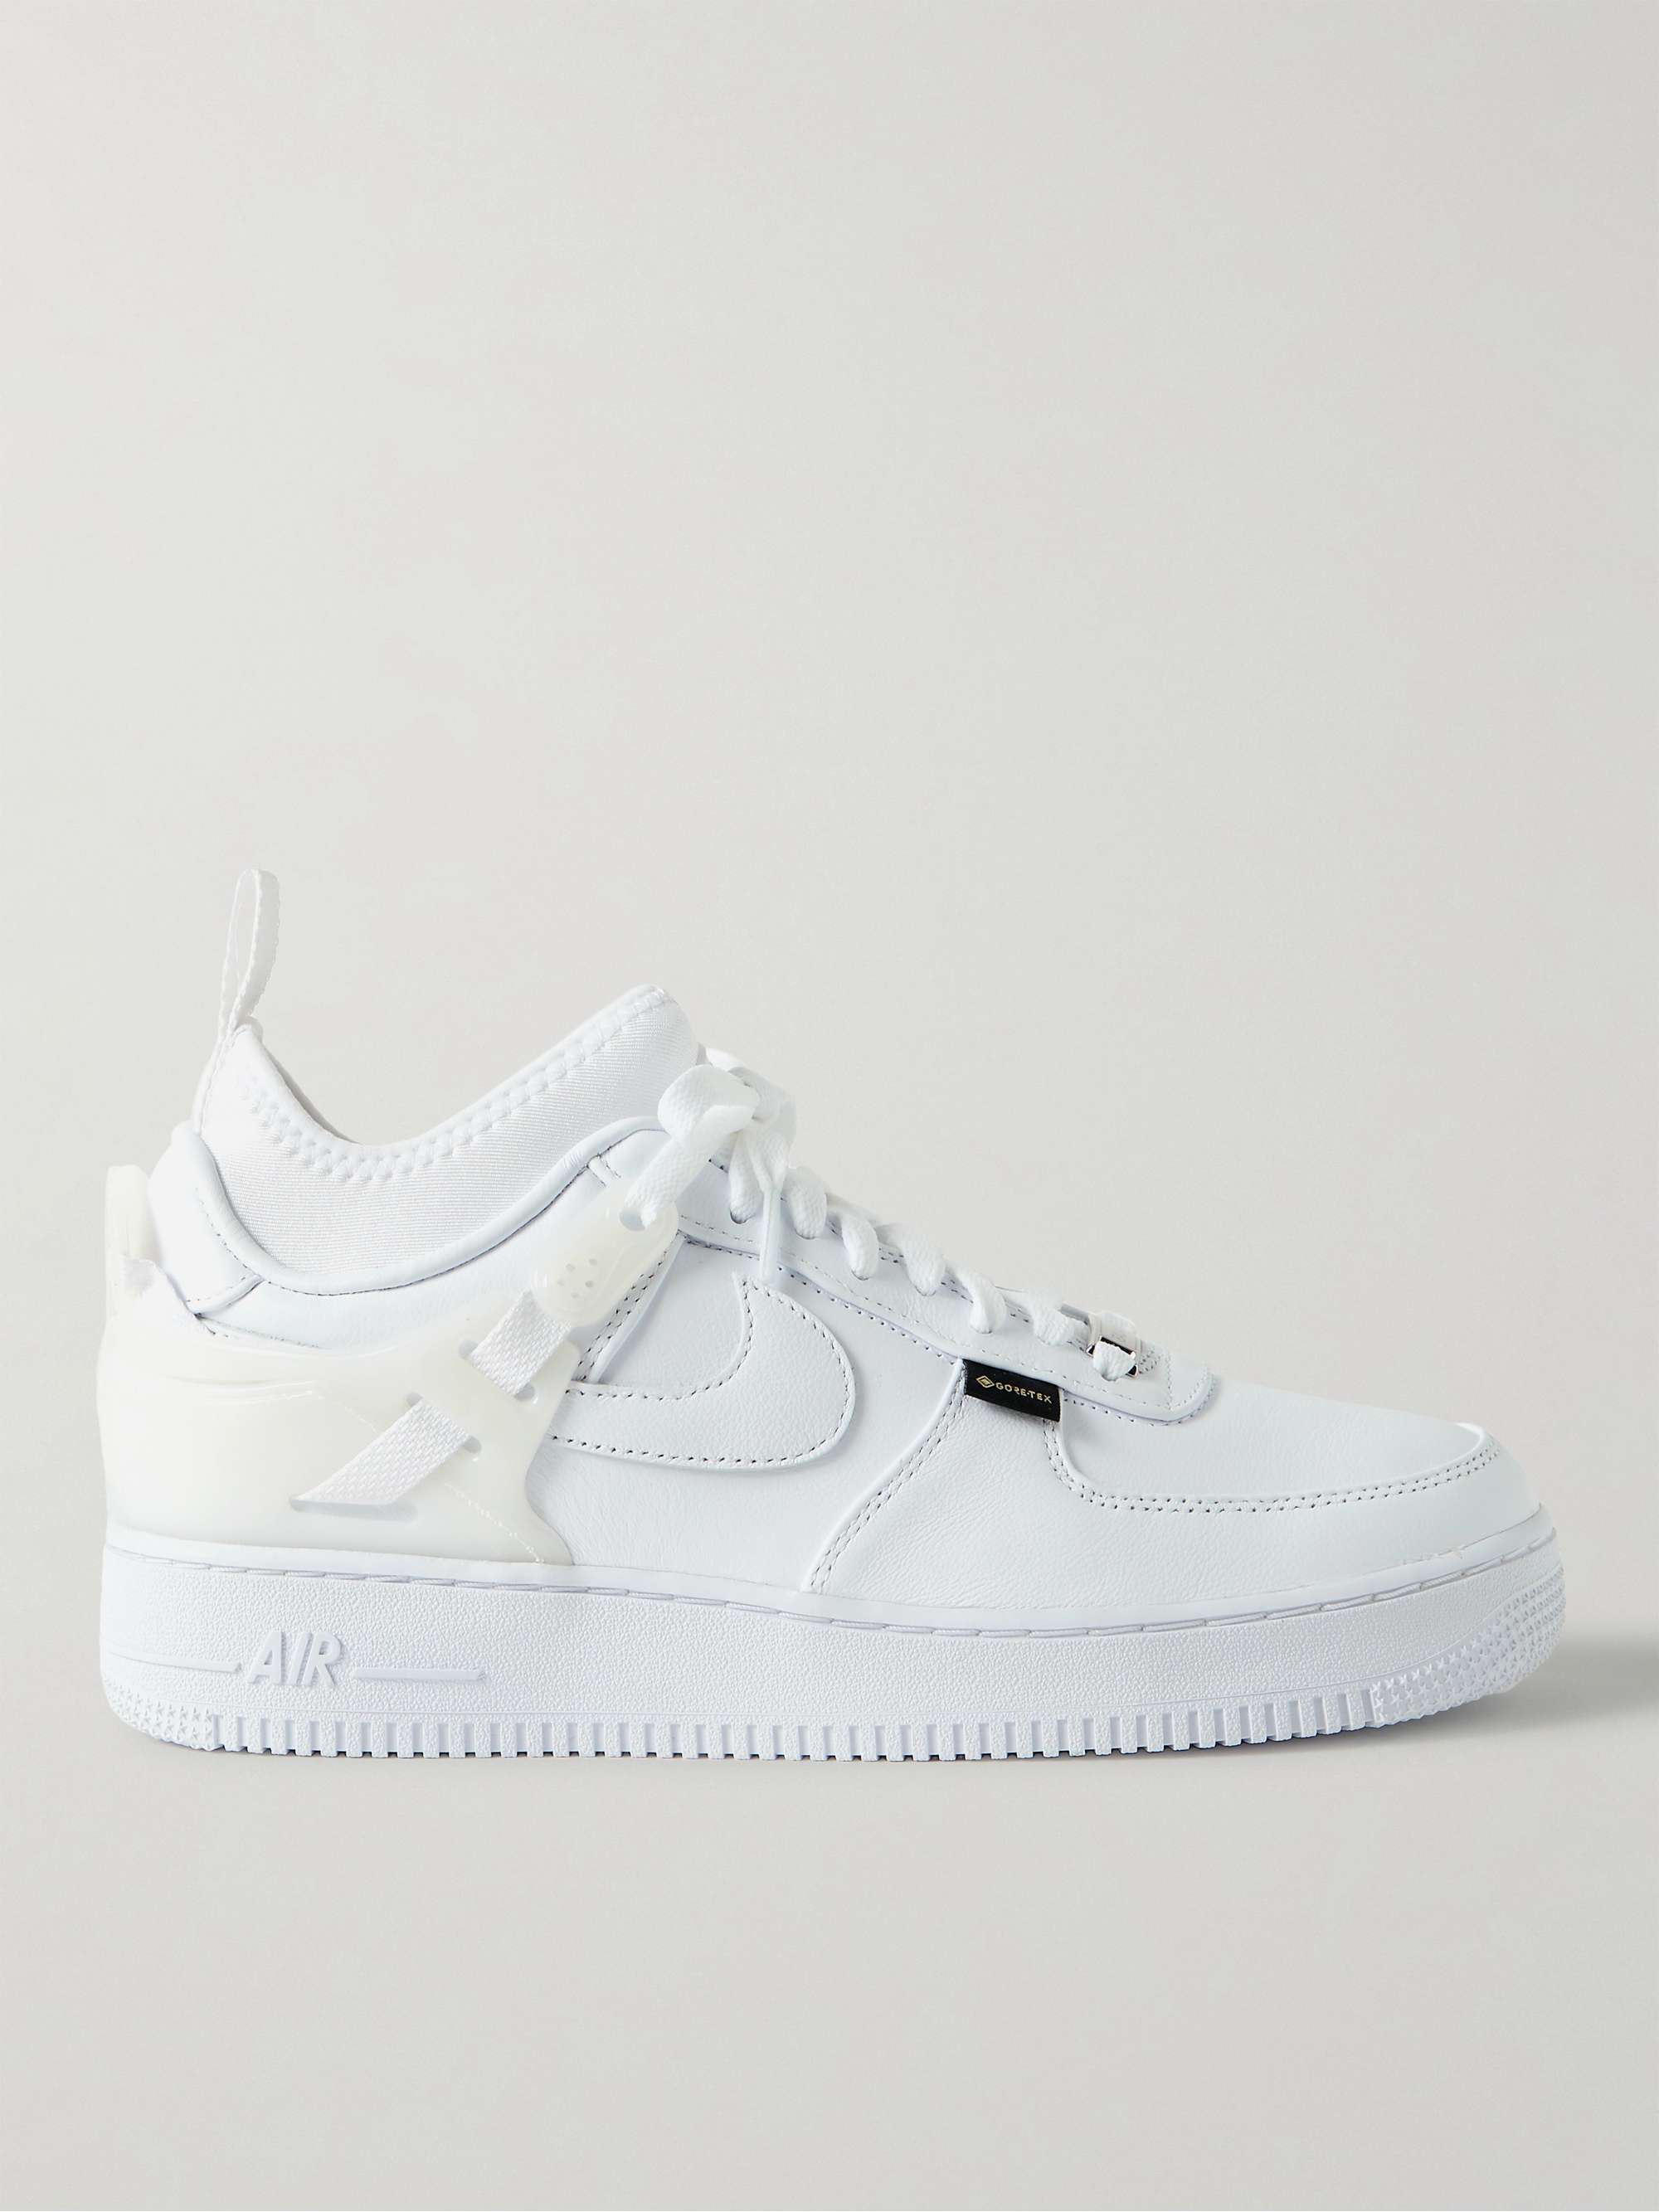 NIKE + Undercover Air Force 1 Rubber-Trimmed Leather Sneakers | MR PORTER